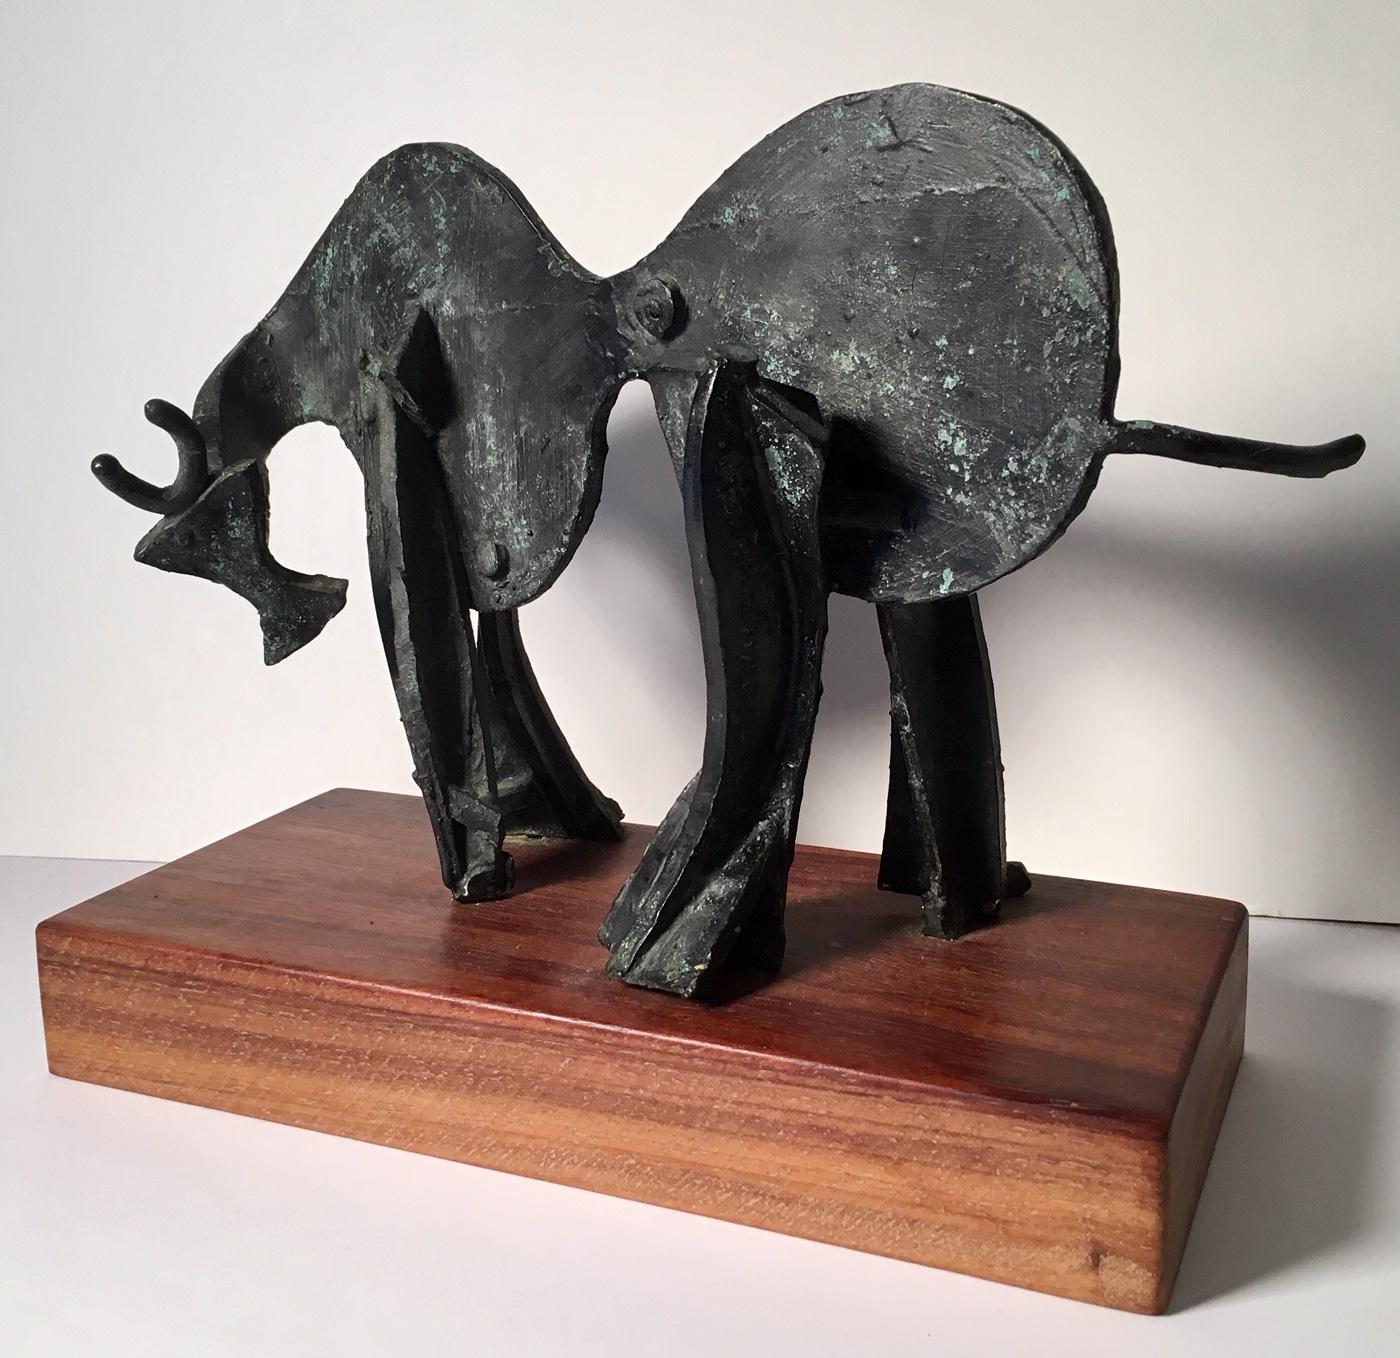 This sculpture of a bull is a powerful piece of art full of strength and fighting spirit. It captures the emotion from the artist and the nature of the animal itself. The creativity behind this casting attests not only to the artistic mastery of the